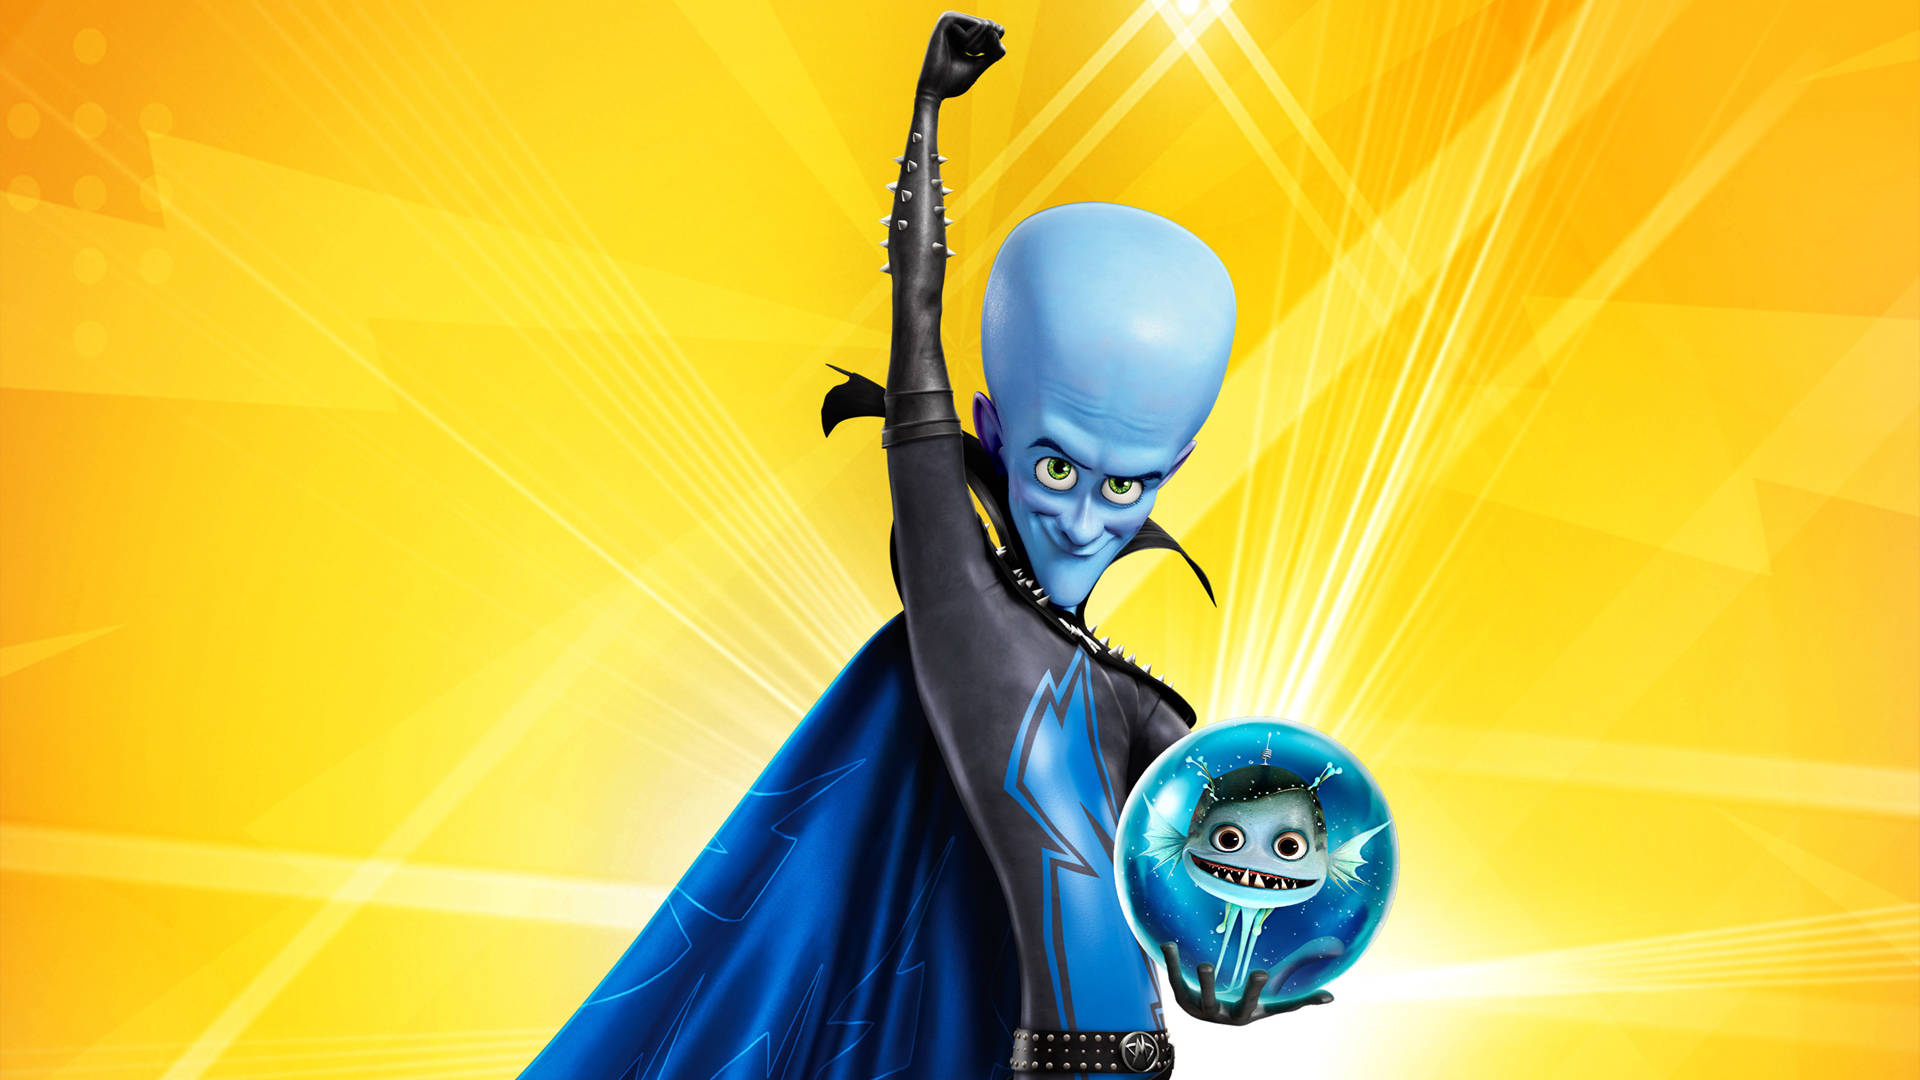 Megamind Fist Pump With Minion Background